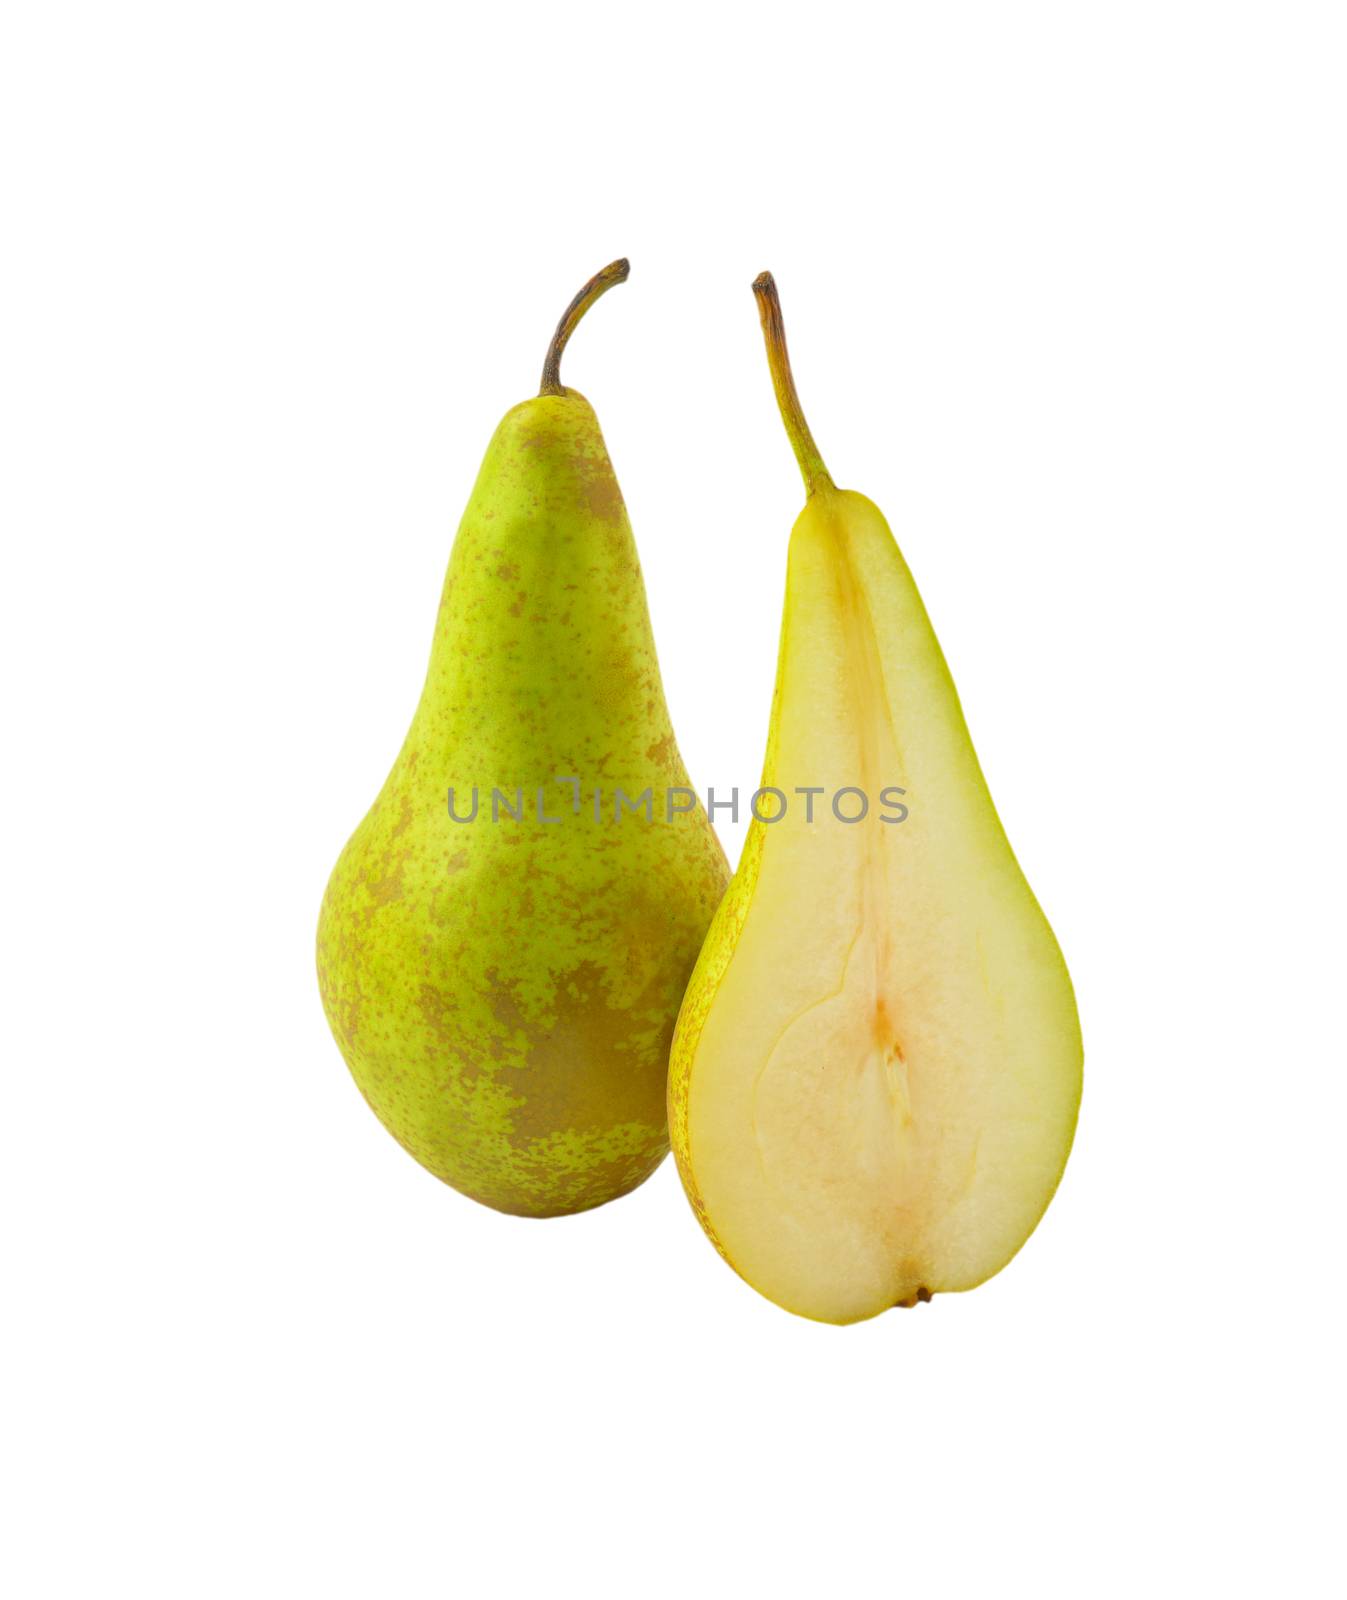 one and a half pears by Digifoodstock